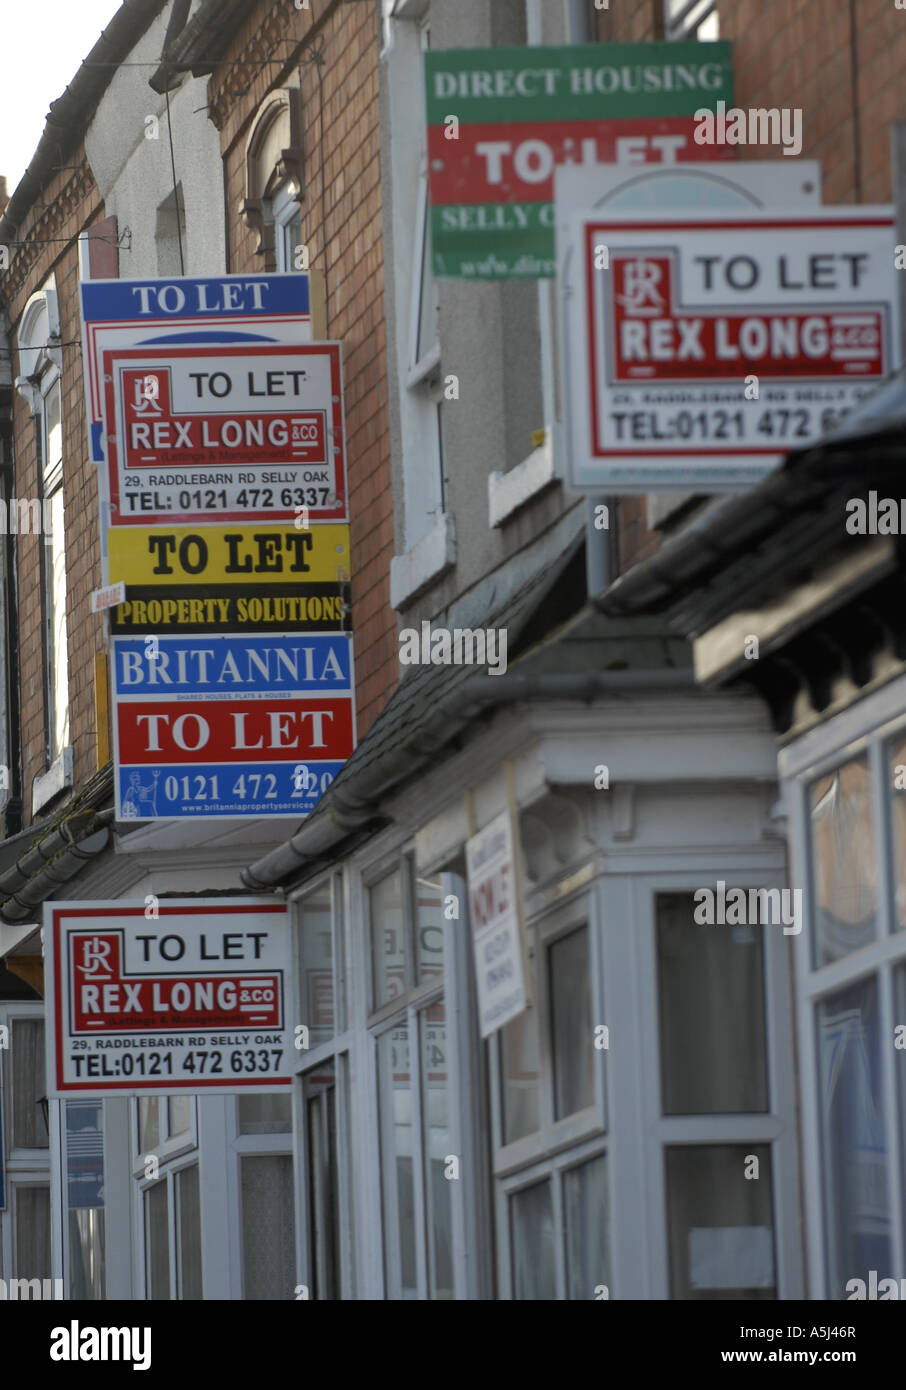 Homes to let in thee student district of Bournbrook, Birmingham, close to the University of Birmingham. Stock Photo